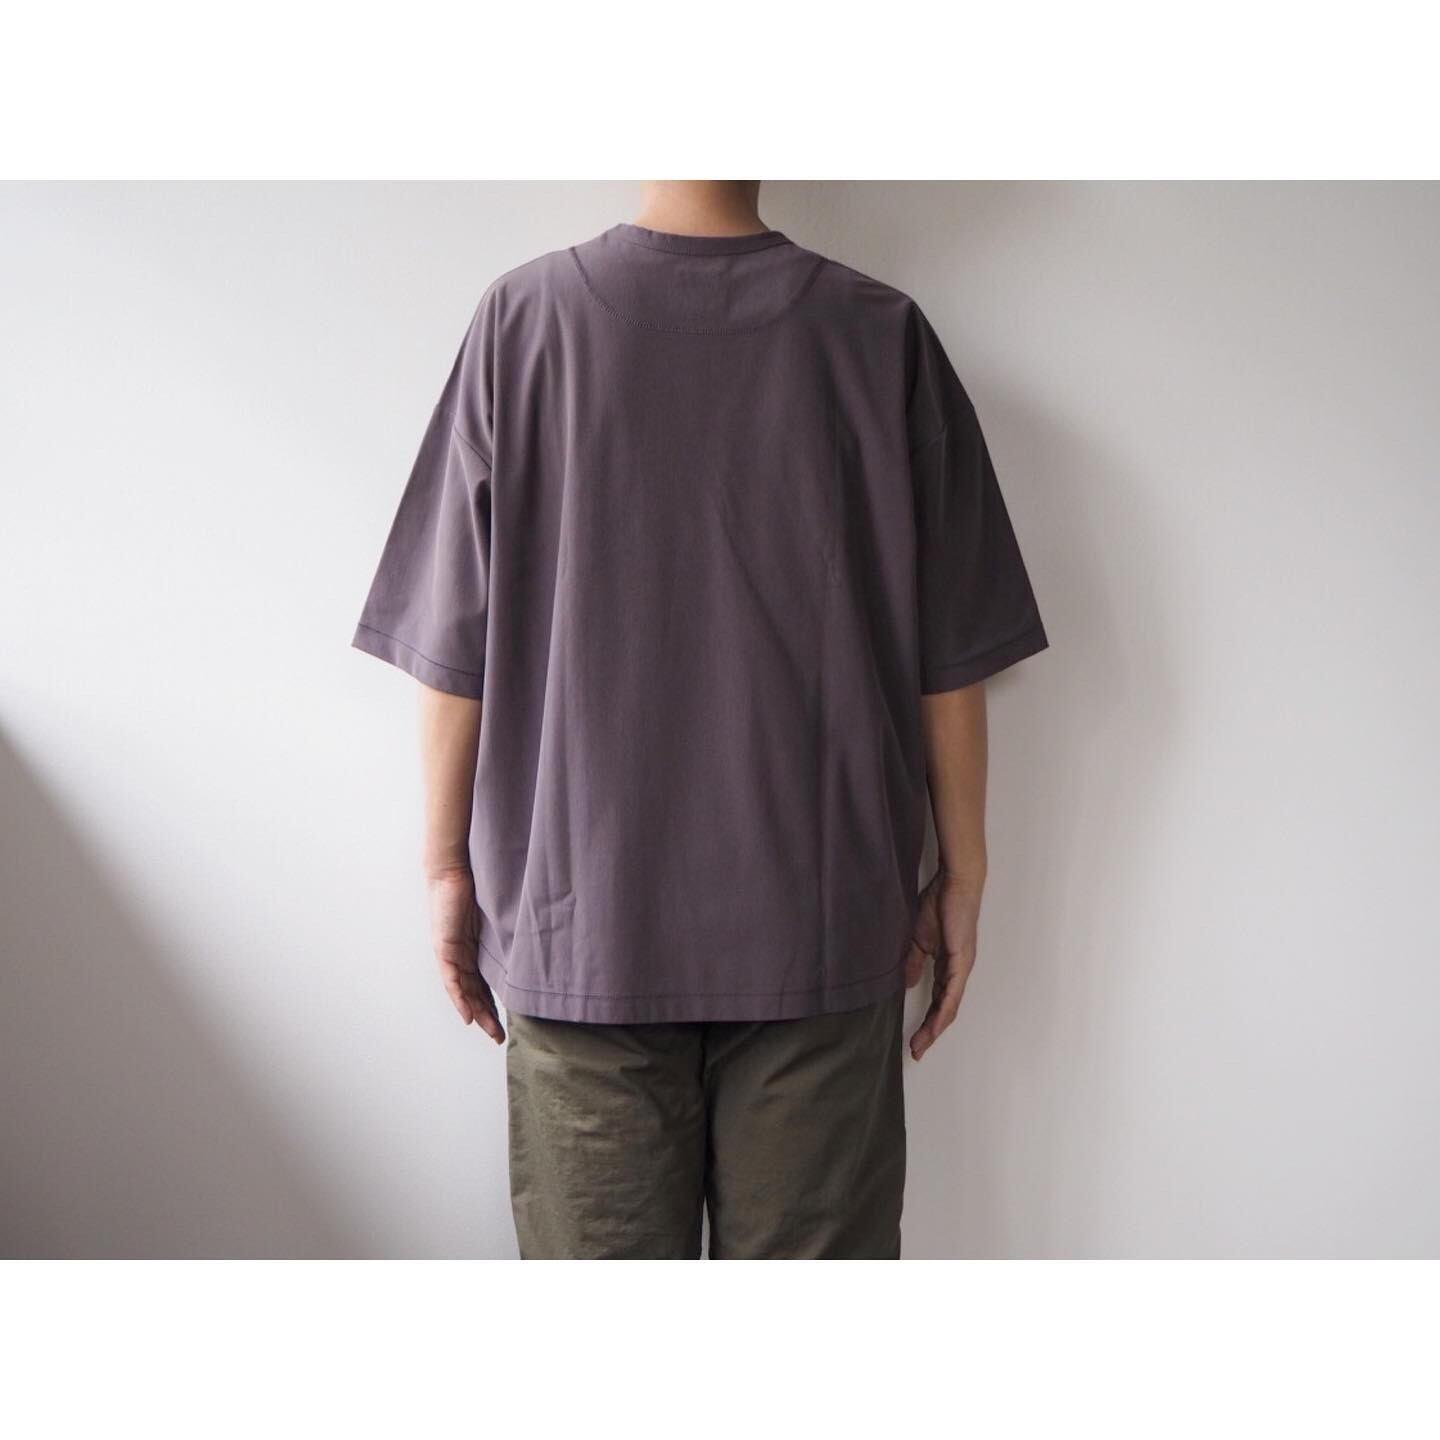 CURLY&Co(カーリーアンドコー) POLAR H/S TEE | AUTHENTIC Life Store powered by BASE